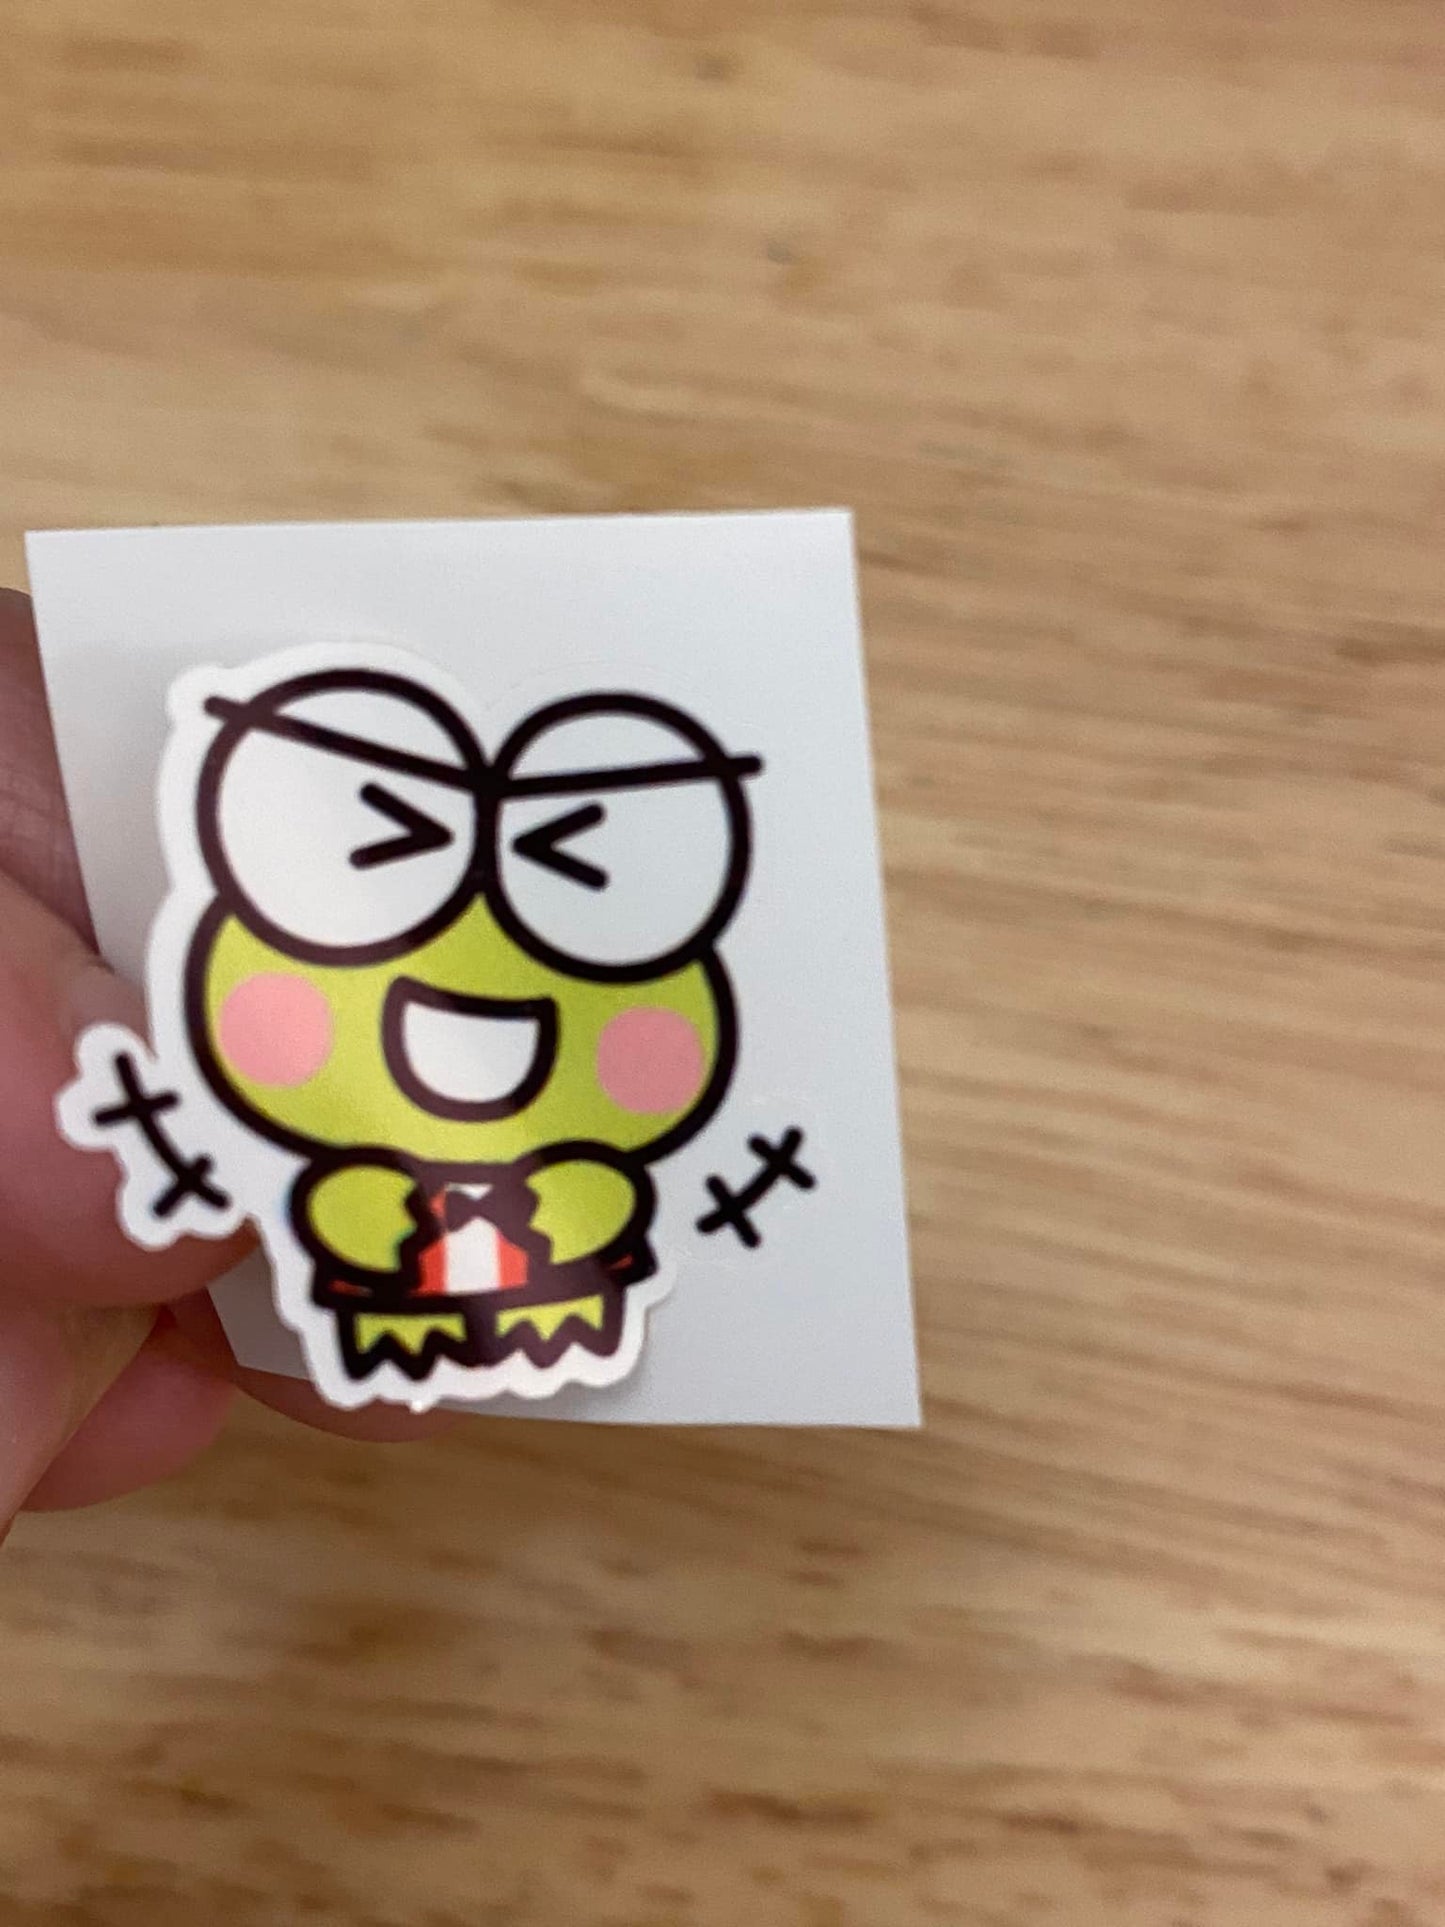 Cute Excited Green Frog Sticker